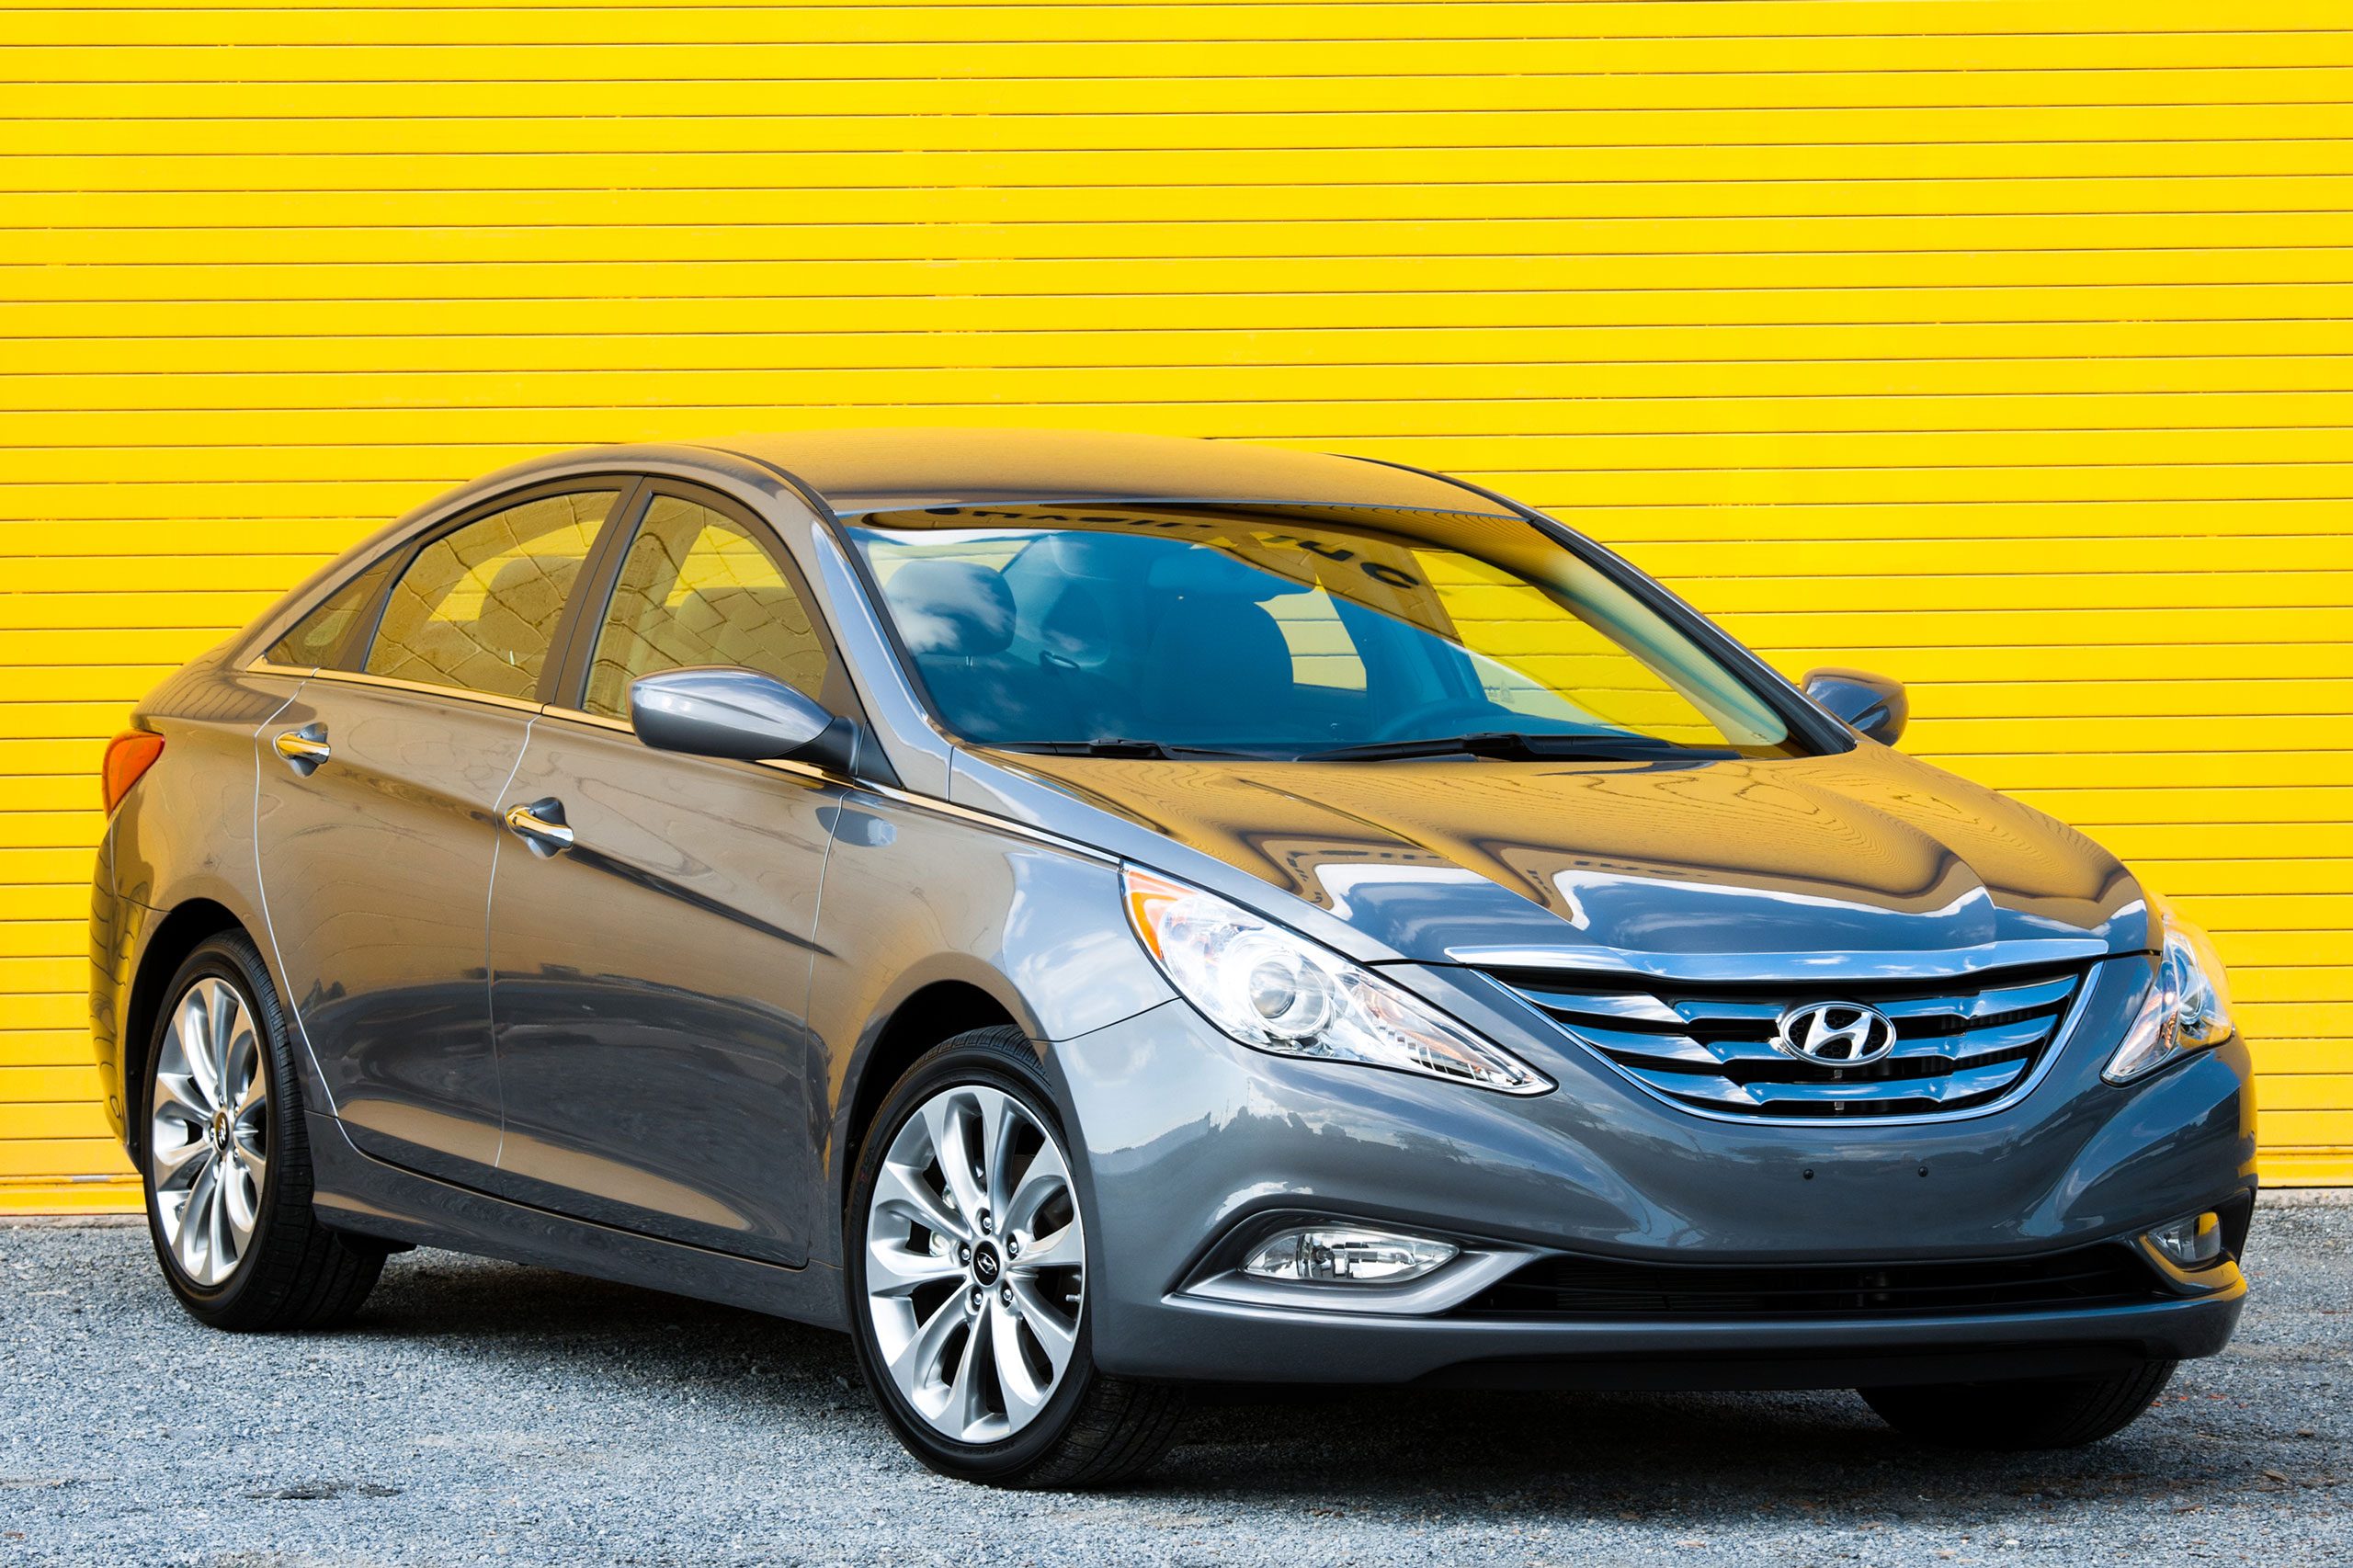 <p>Thanks to a generous five-year, 60,000-mile warranty, many used Hyundais <a href="https://www.businessinsider.com/best-used-cars-to-buy-2019-5#hyundai-sonata-1" rel="nofollow noopener noreferrer">may still be covered</a> when they hit the used car market. Add to that the extra benefit of a used sticker price about $10,000 less than the original cost for a three-year-old Sonata and you have one of the best used car deals available. You may need an affordable used car in a hurry if you see one of these <a href="https://www.rd.com/list/signs-your-car-is-about-to-die/">14 signs that your car is about to die</a>.</p>